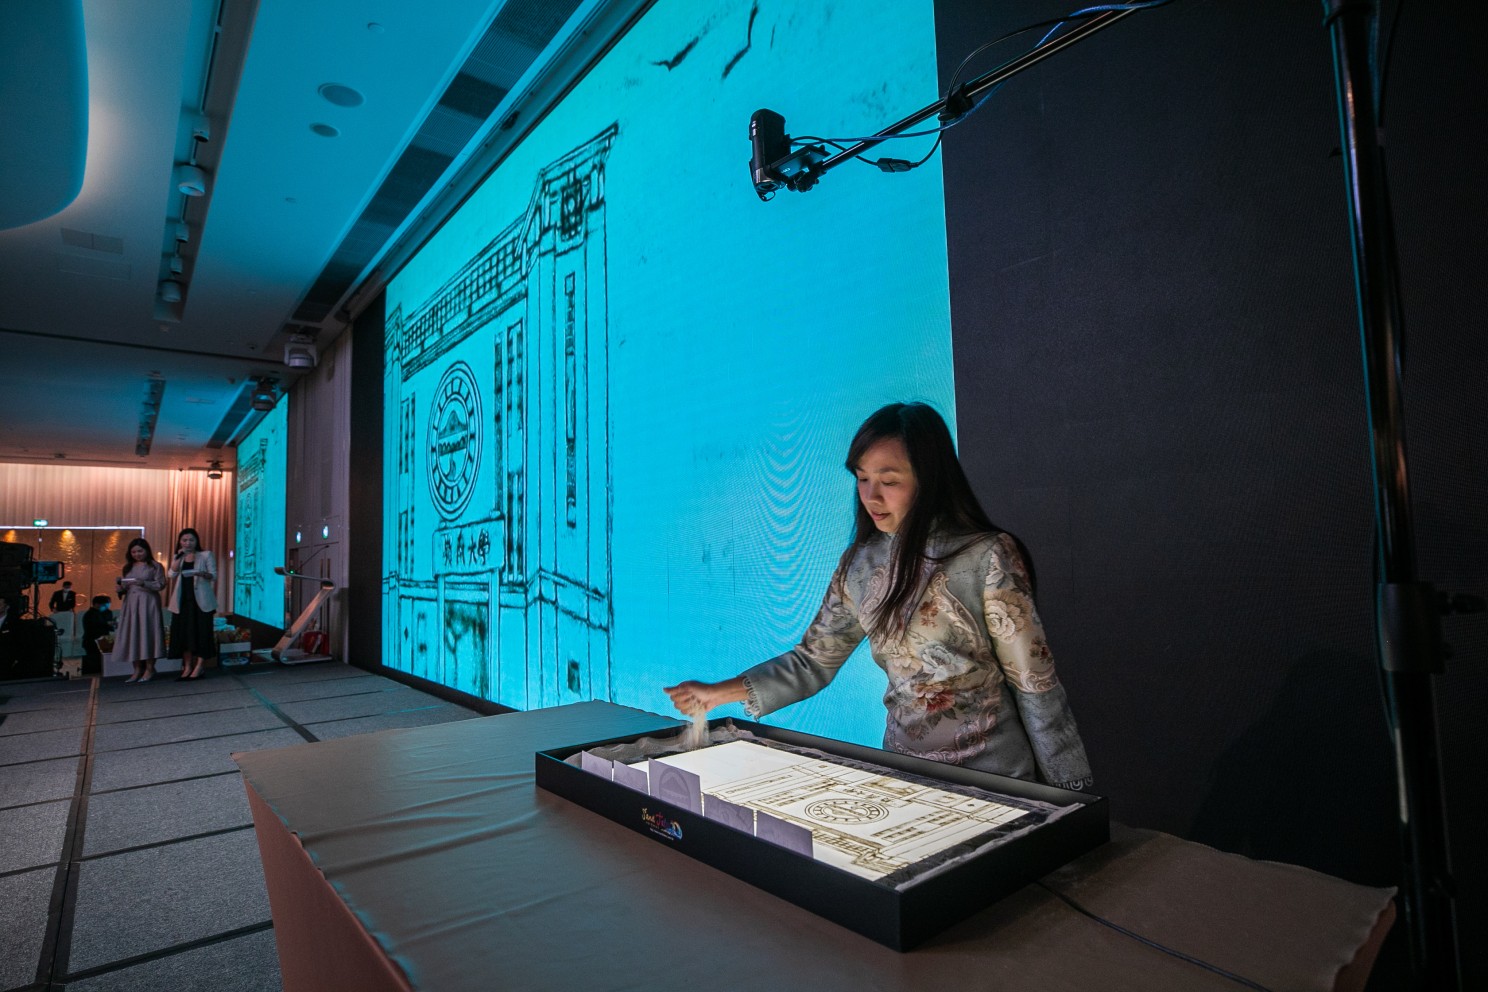 The event also features a sand painting performance by renowned Hong Kong Sand Painting Artist Ms Edith Wu, walking the audience through Lingnan University's rich history and milestones on a artistic sand painting journey.